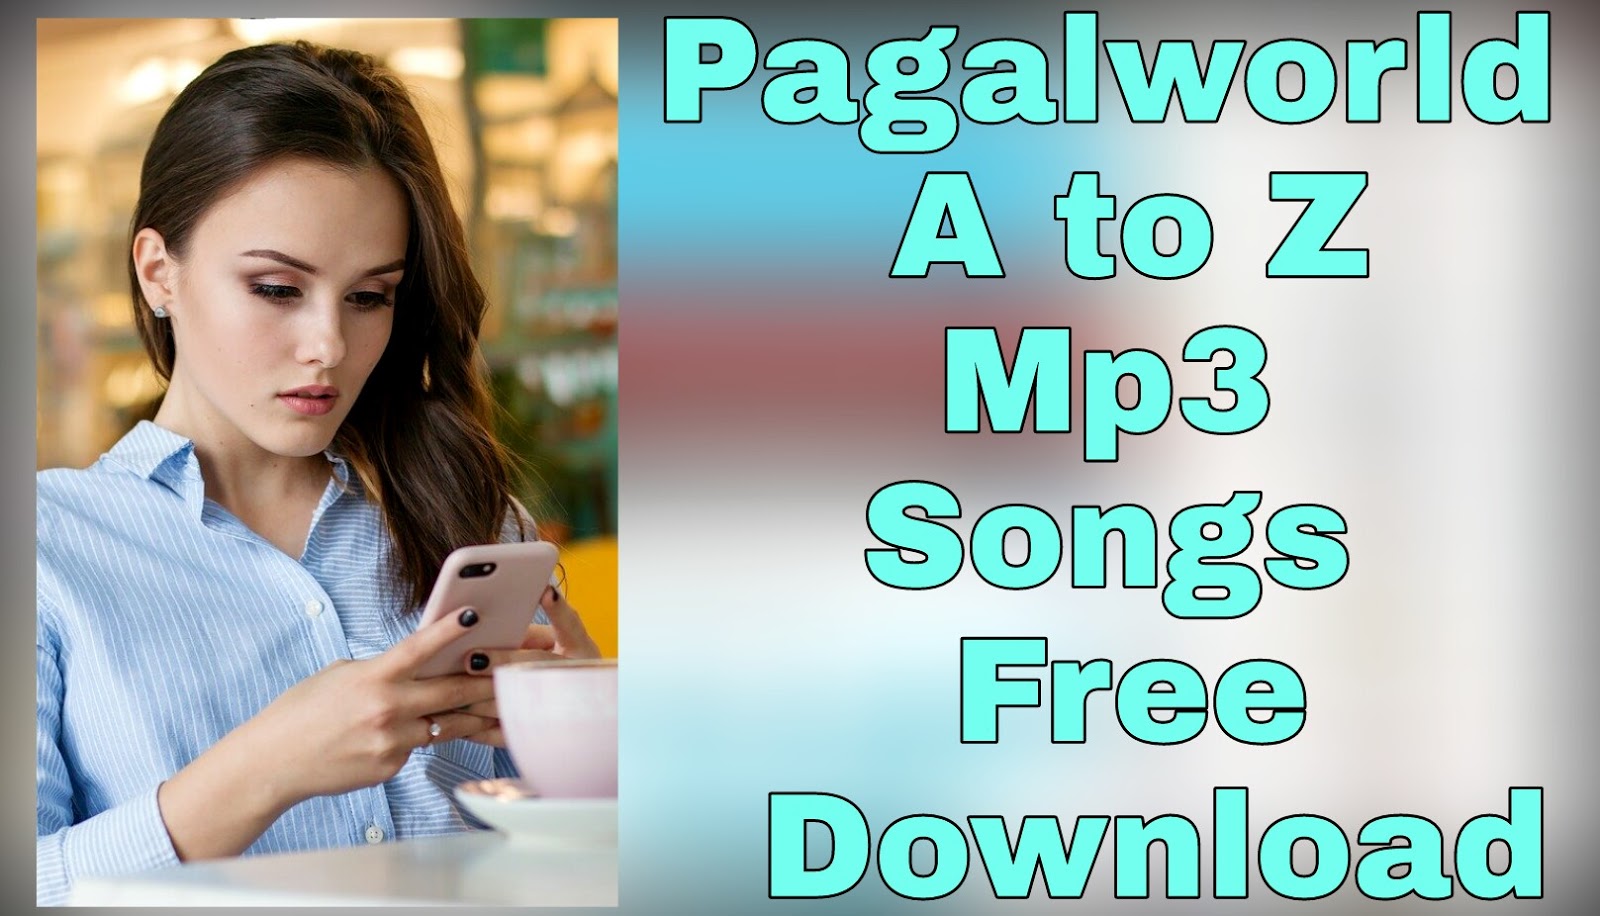 Pagalworld A to Z Bollywood Mp3 Songs Download 320kbps - Sohohindi.in